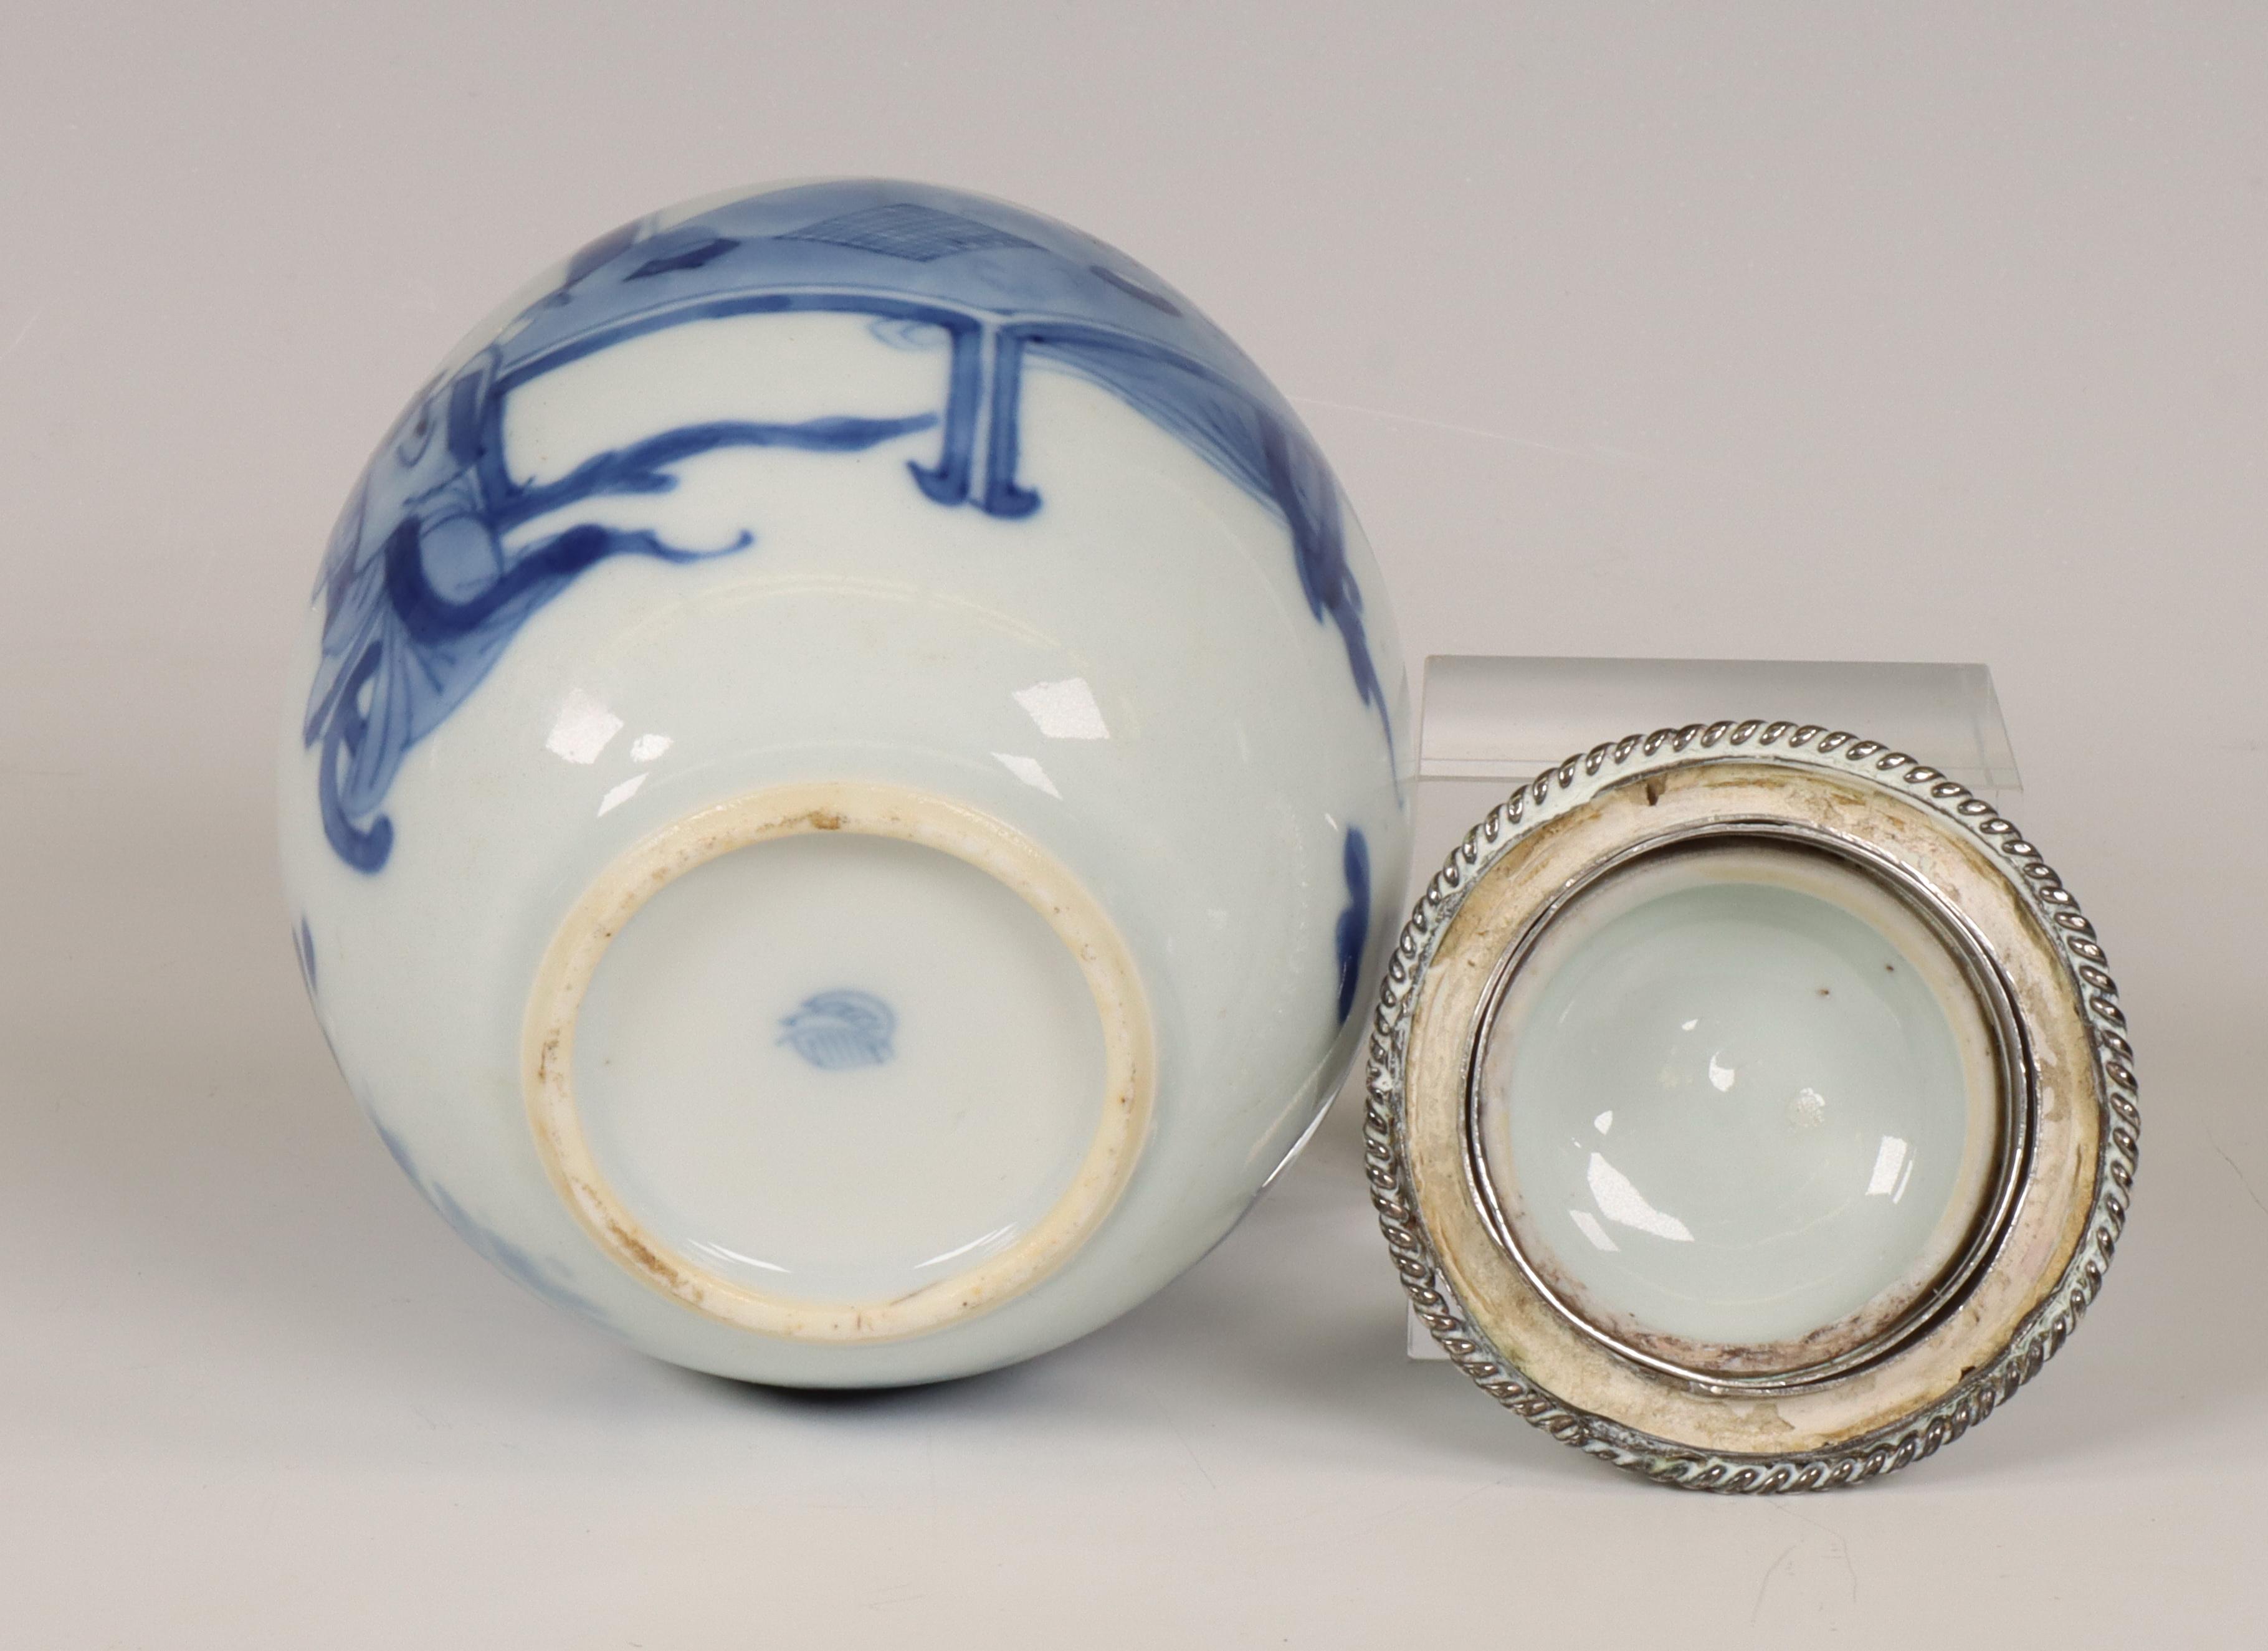 China, a silver-mounted blue and white porcelain oviform jar and cover, Kangxi period (1662-1722), t - Image 7 of 8